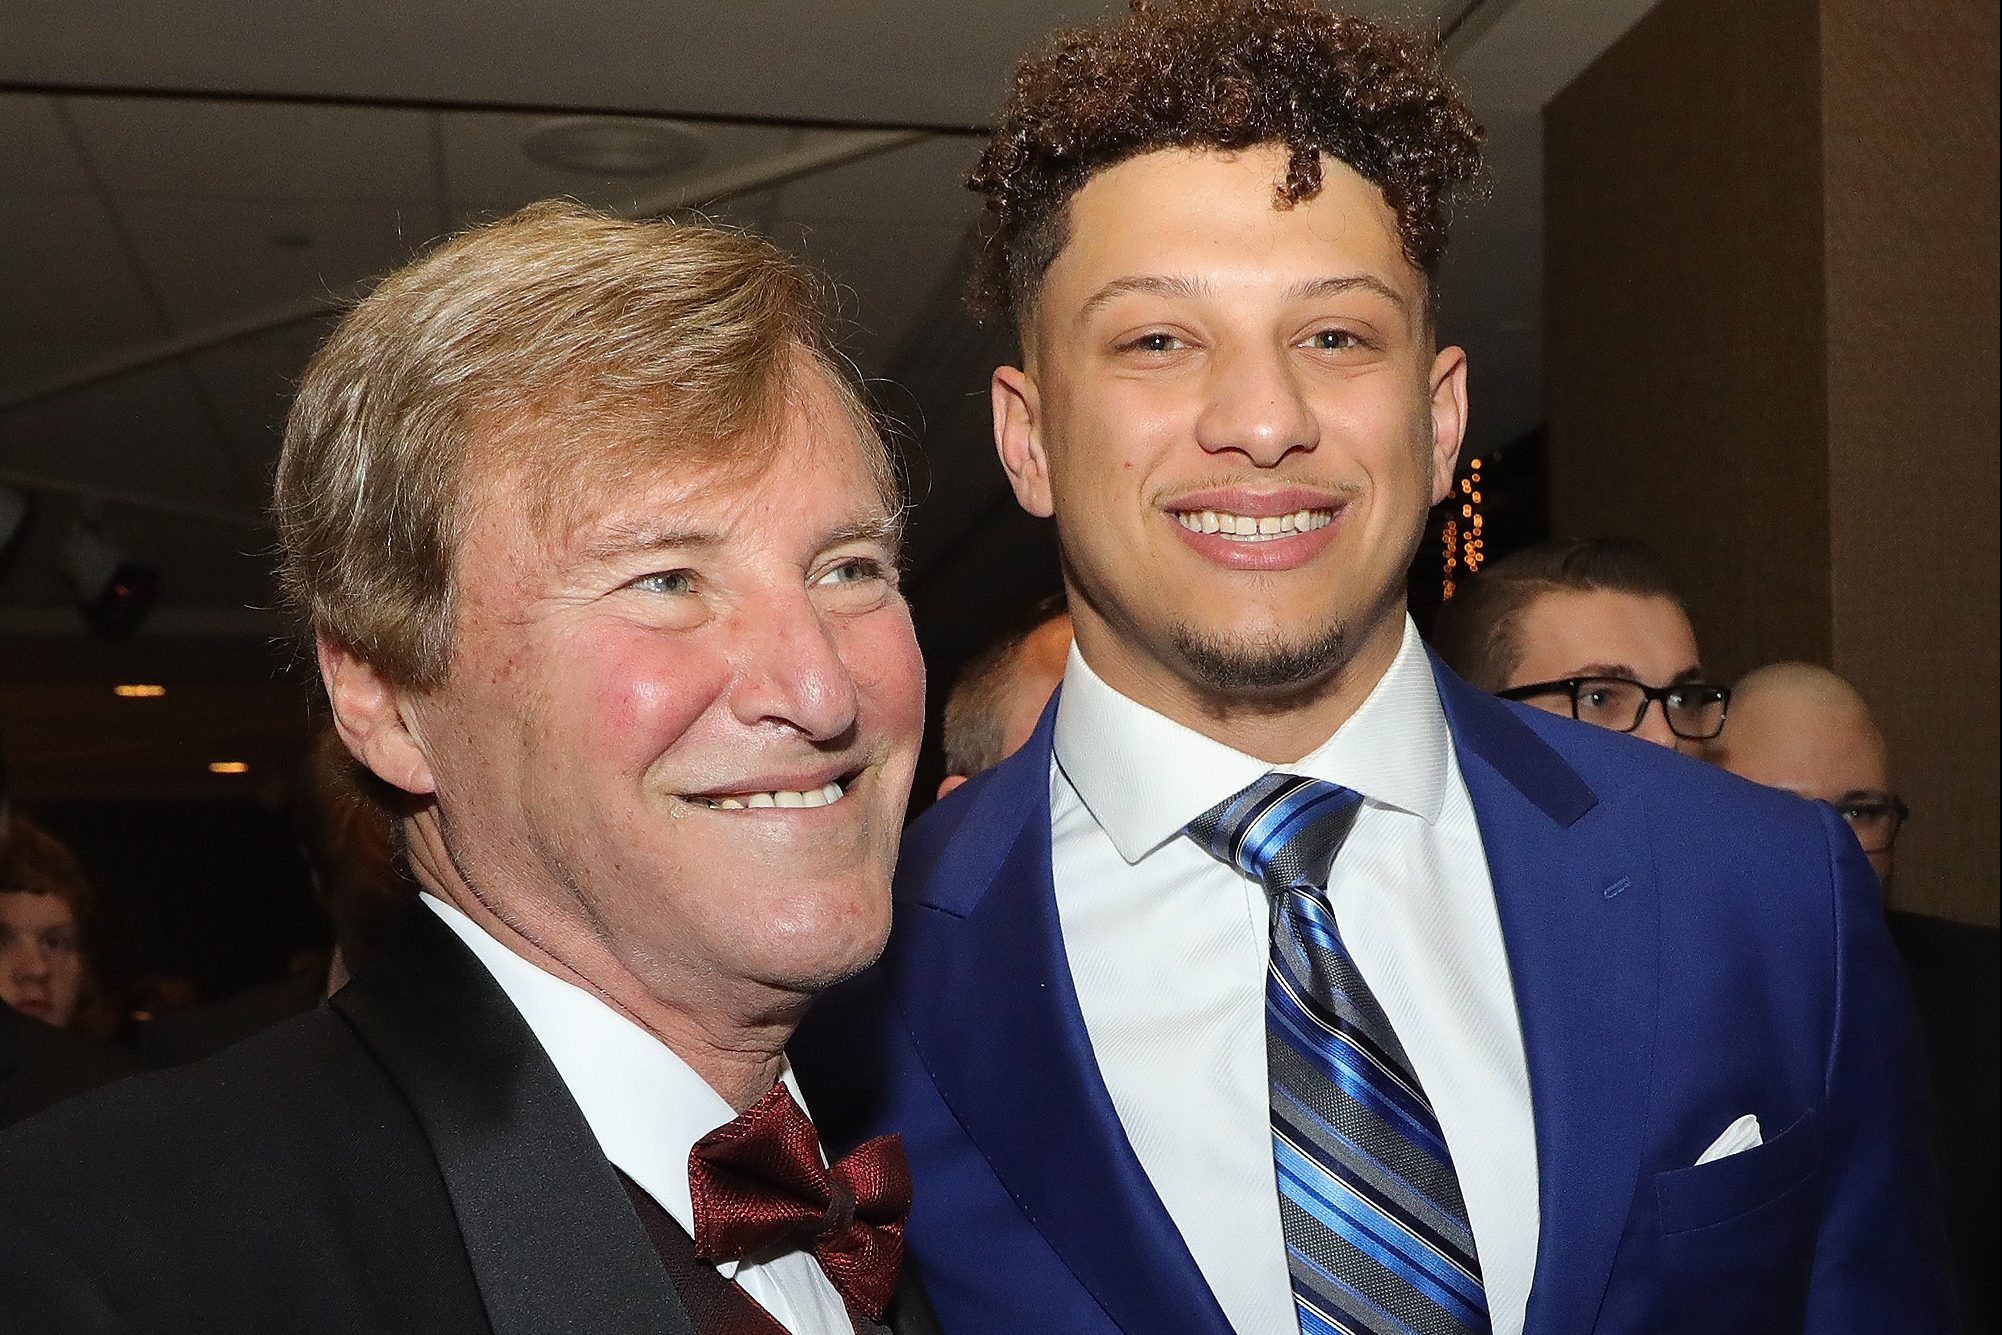 Leigh Steinberg and his client Patrick Mahomes of the Kansas City Chiefs